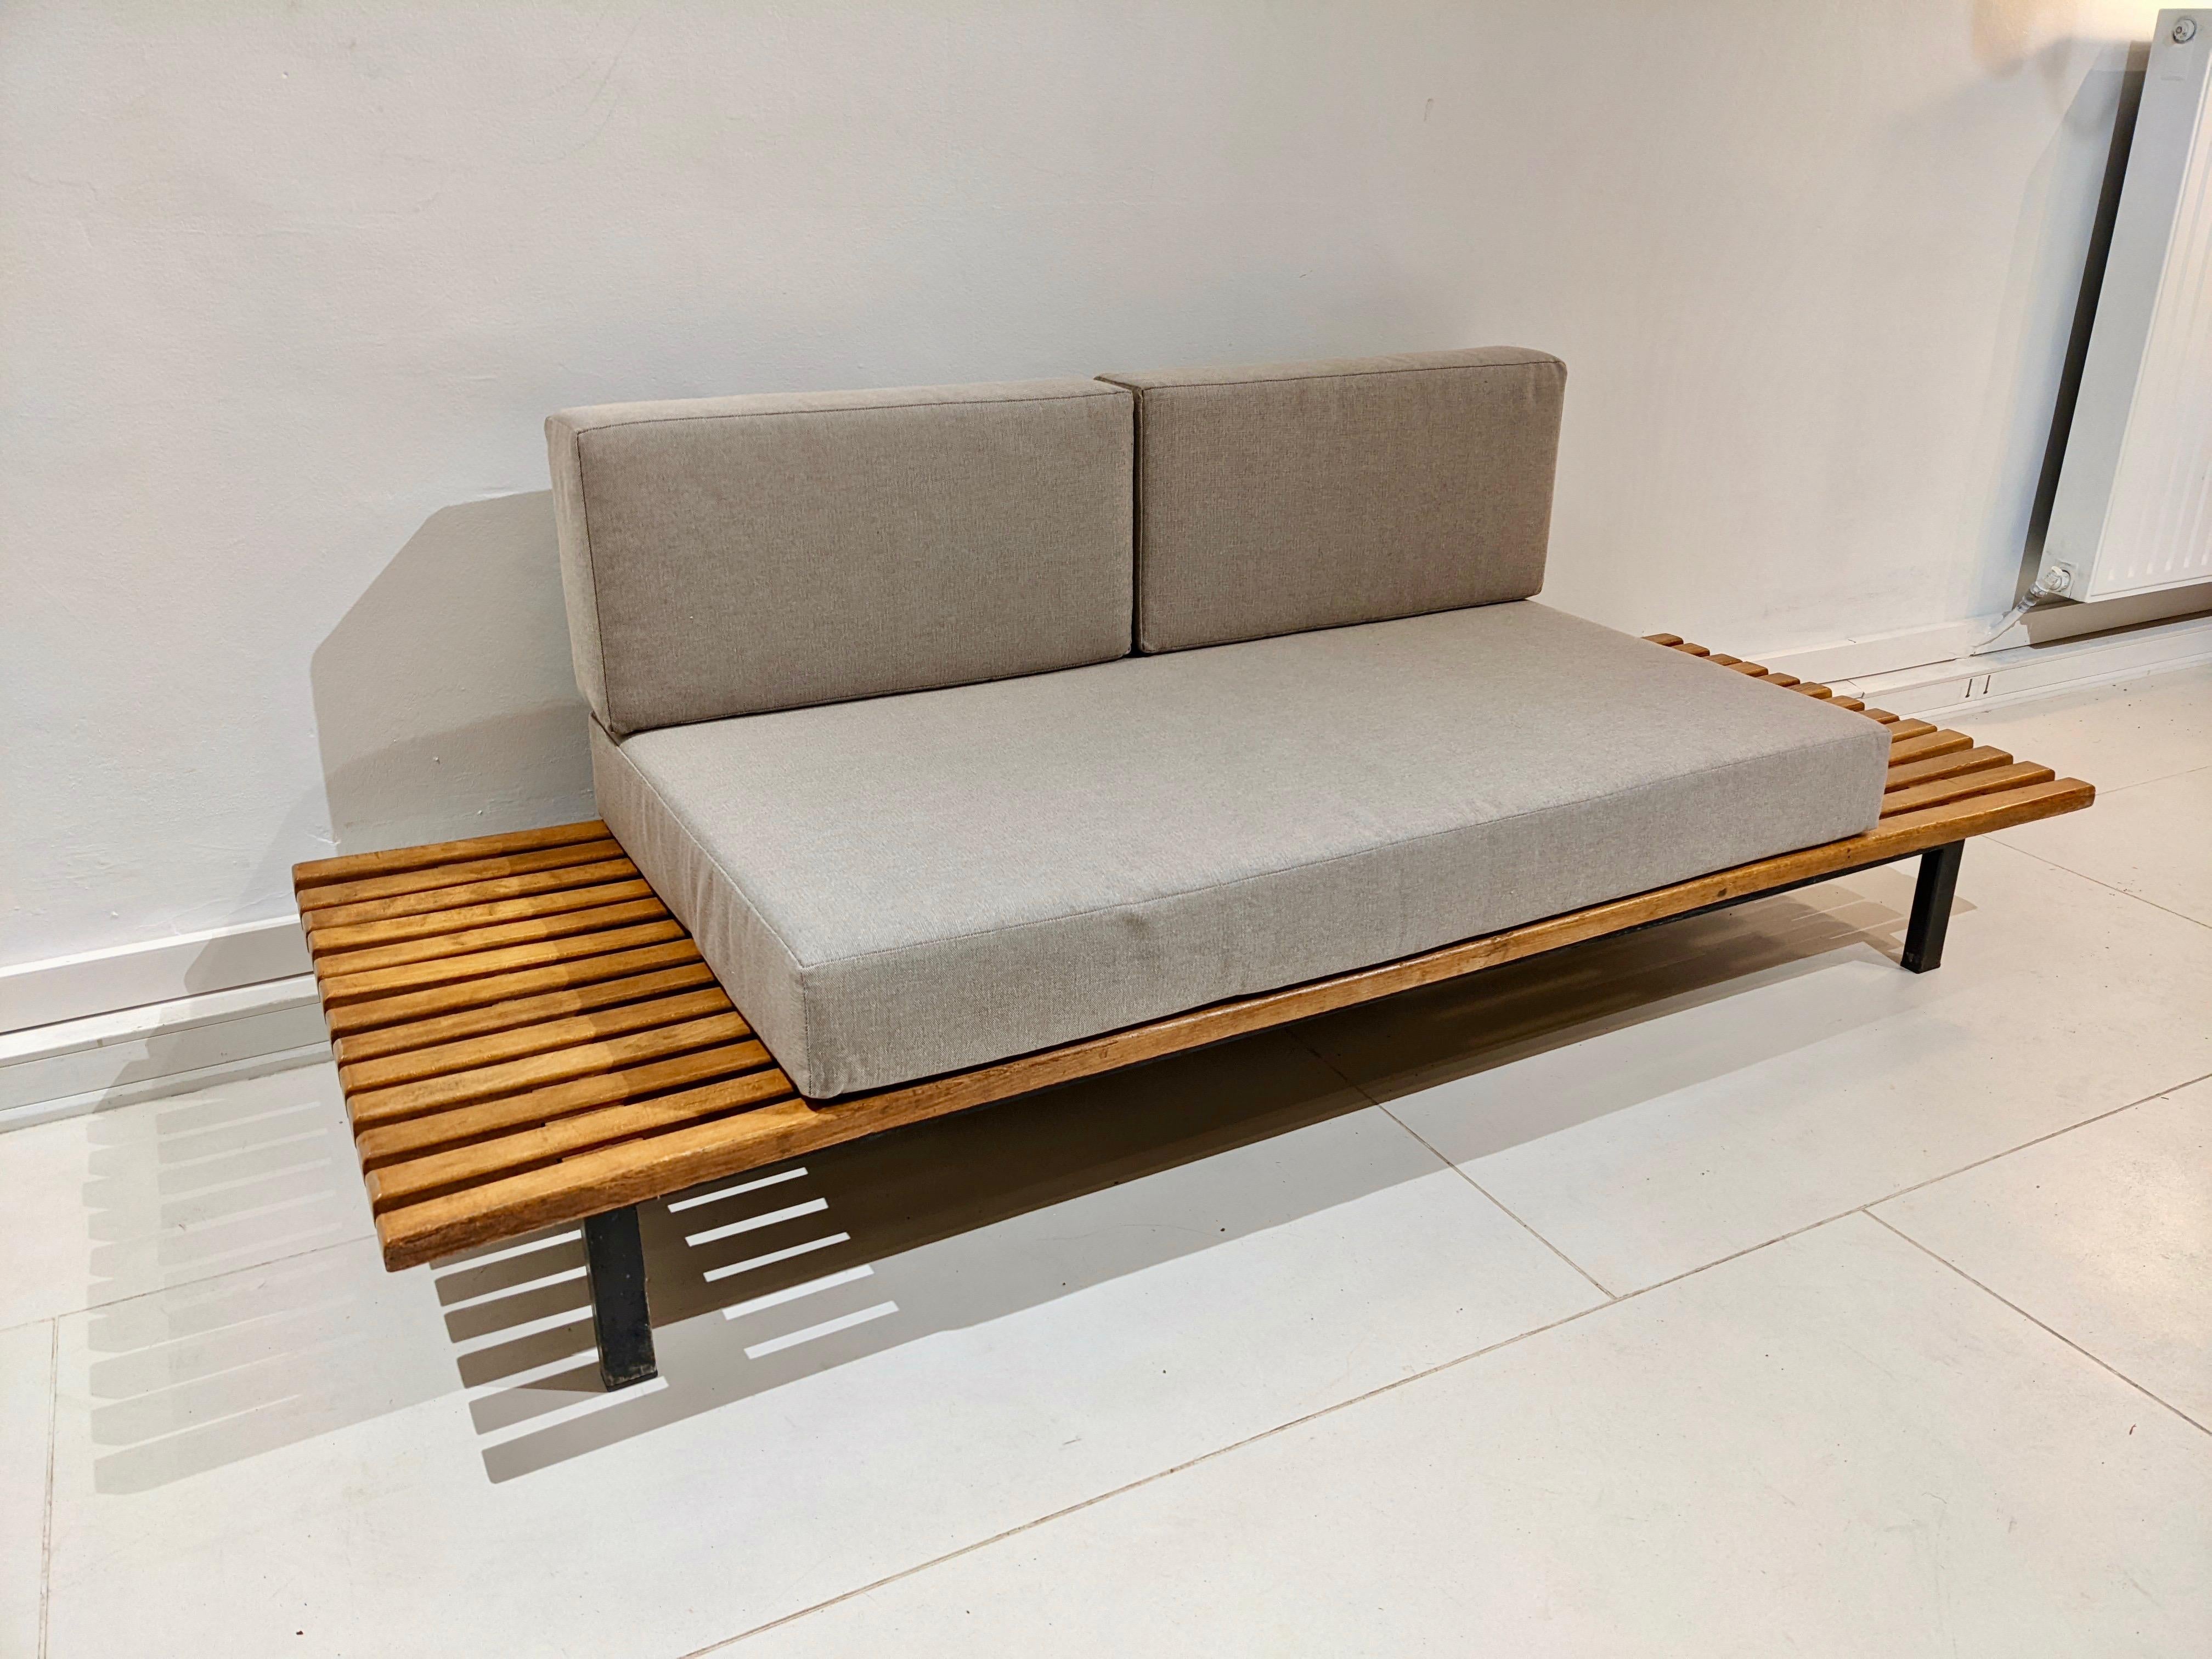 Cansado bench in oak wood and grey fabric cushion by charlotte perriand. Very good condition. The slats have been restored. Edition steph simon. Circa 1954. 
Provenance: cansado mining city, mauritania, africa. 
Dimensions: W 190 cm x D 70 cm x H